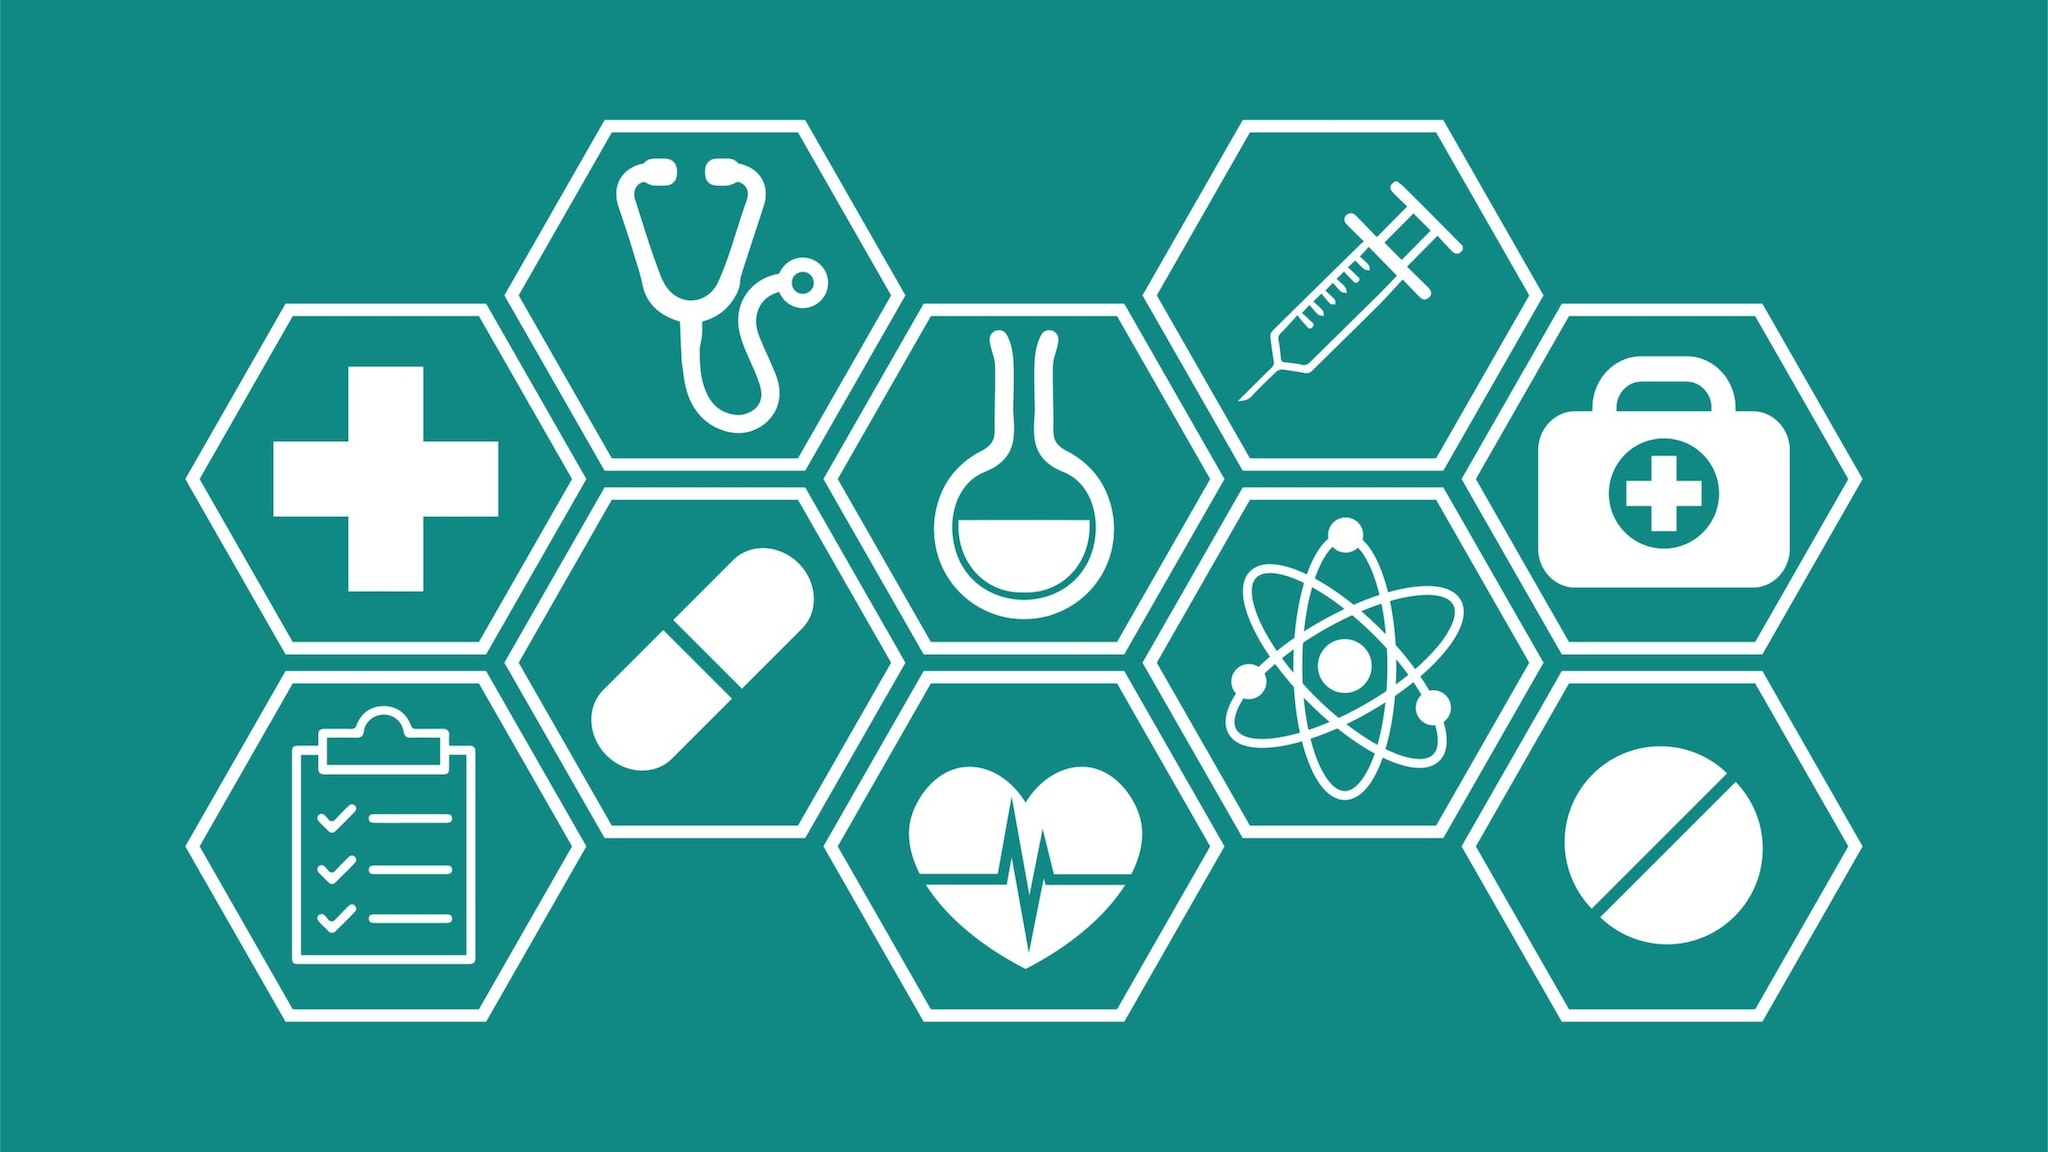 10 icons of health care images, such as a stethoscope and medications.